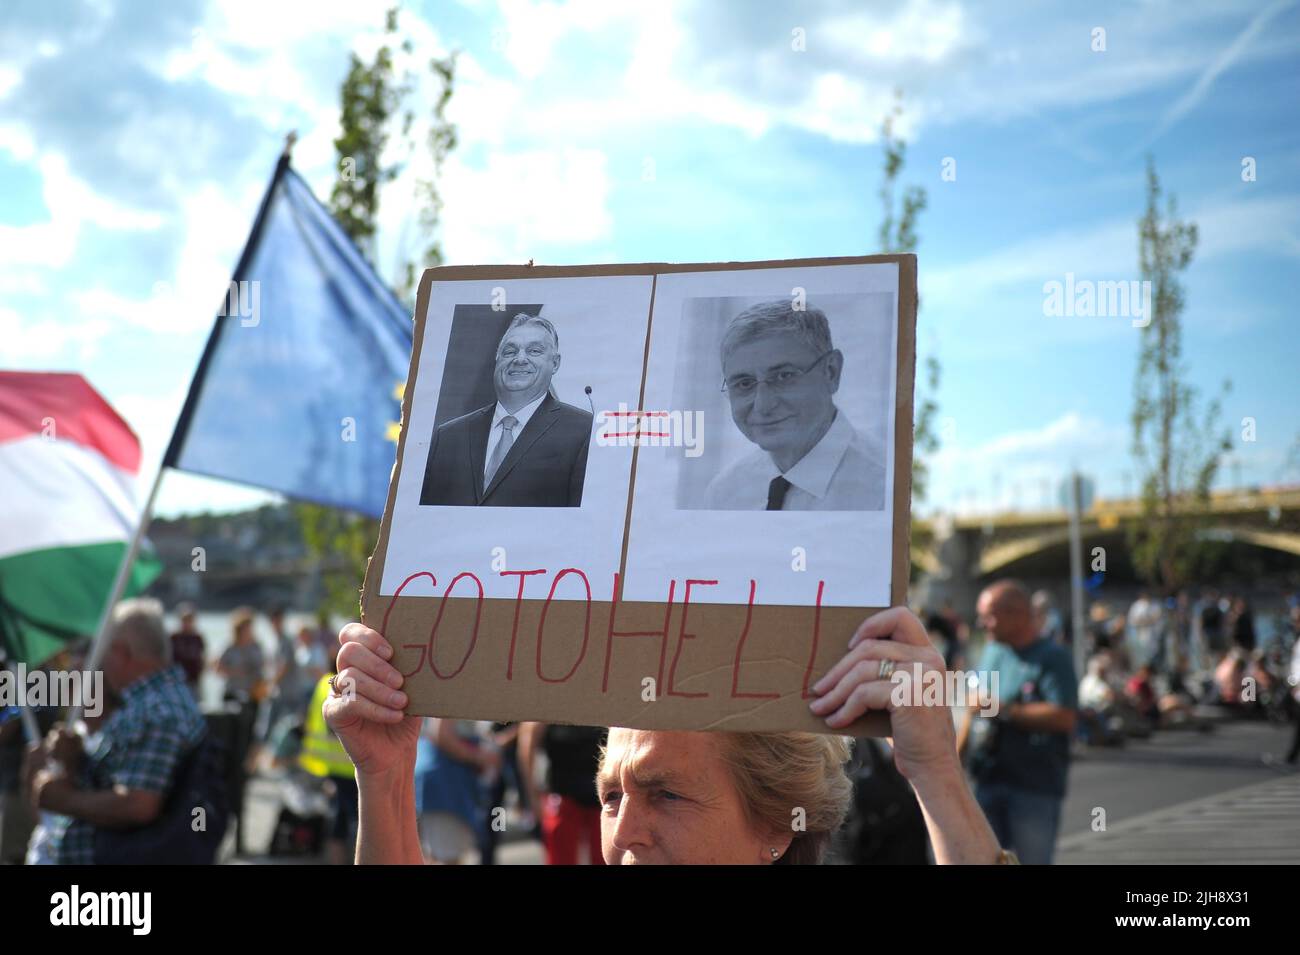 Budapest, Hungary, 16th Jul 2022, sign saying Ferenc Gyurcsány (Former PM) and Viktor Orbán (PM) is equal, Balint Szentgallay / Alamy Live News Stock Photo